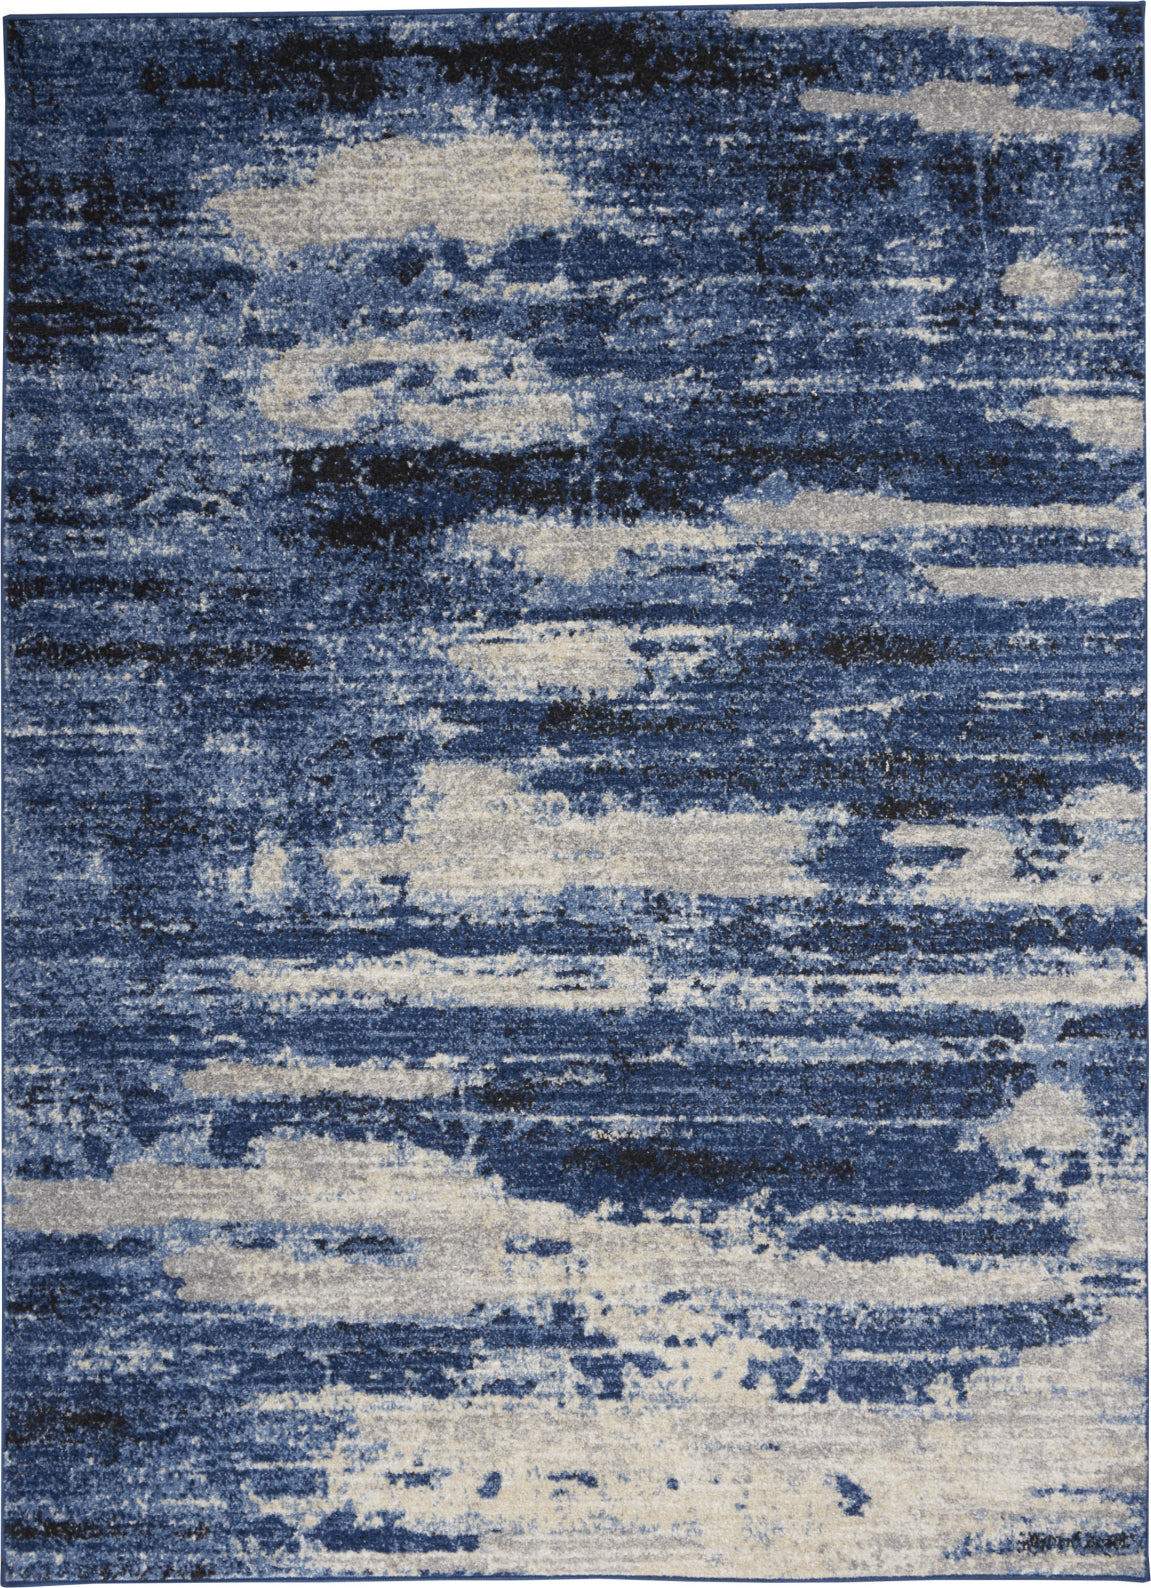 Klein and RFV02 Flow Blue River Calvin – CK001 Teal/Ivory Decor Rug Rugs Incredible Area